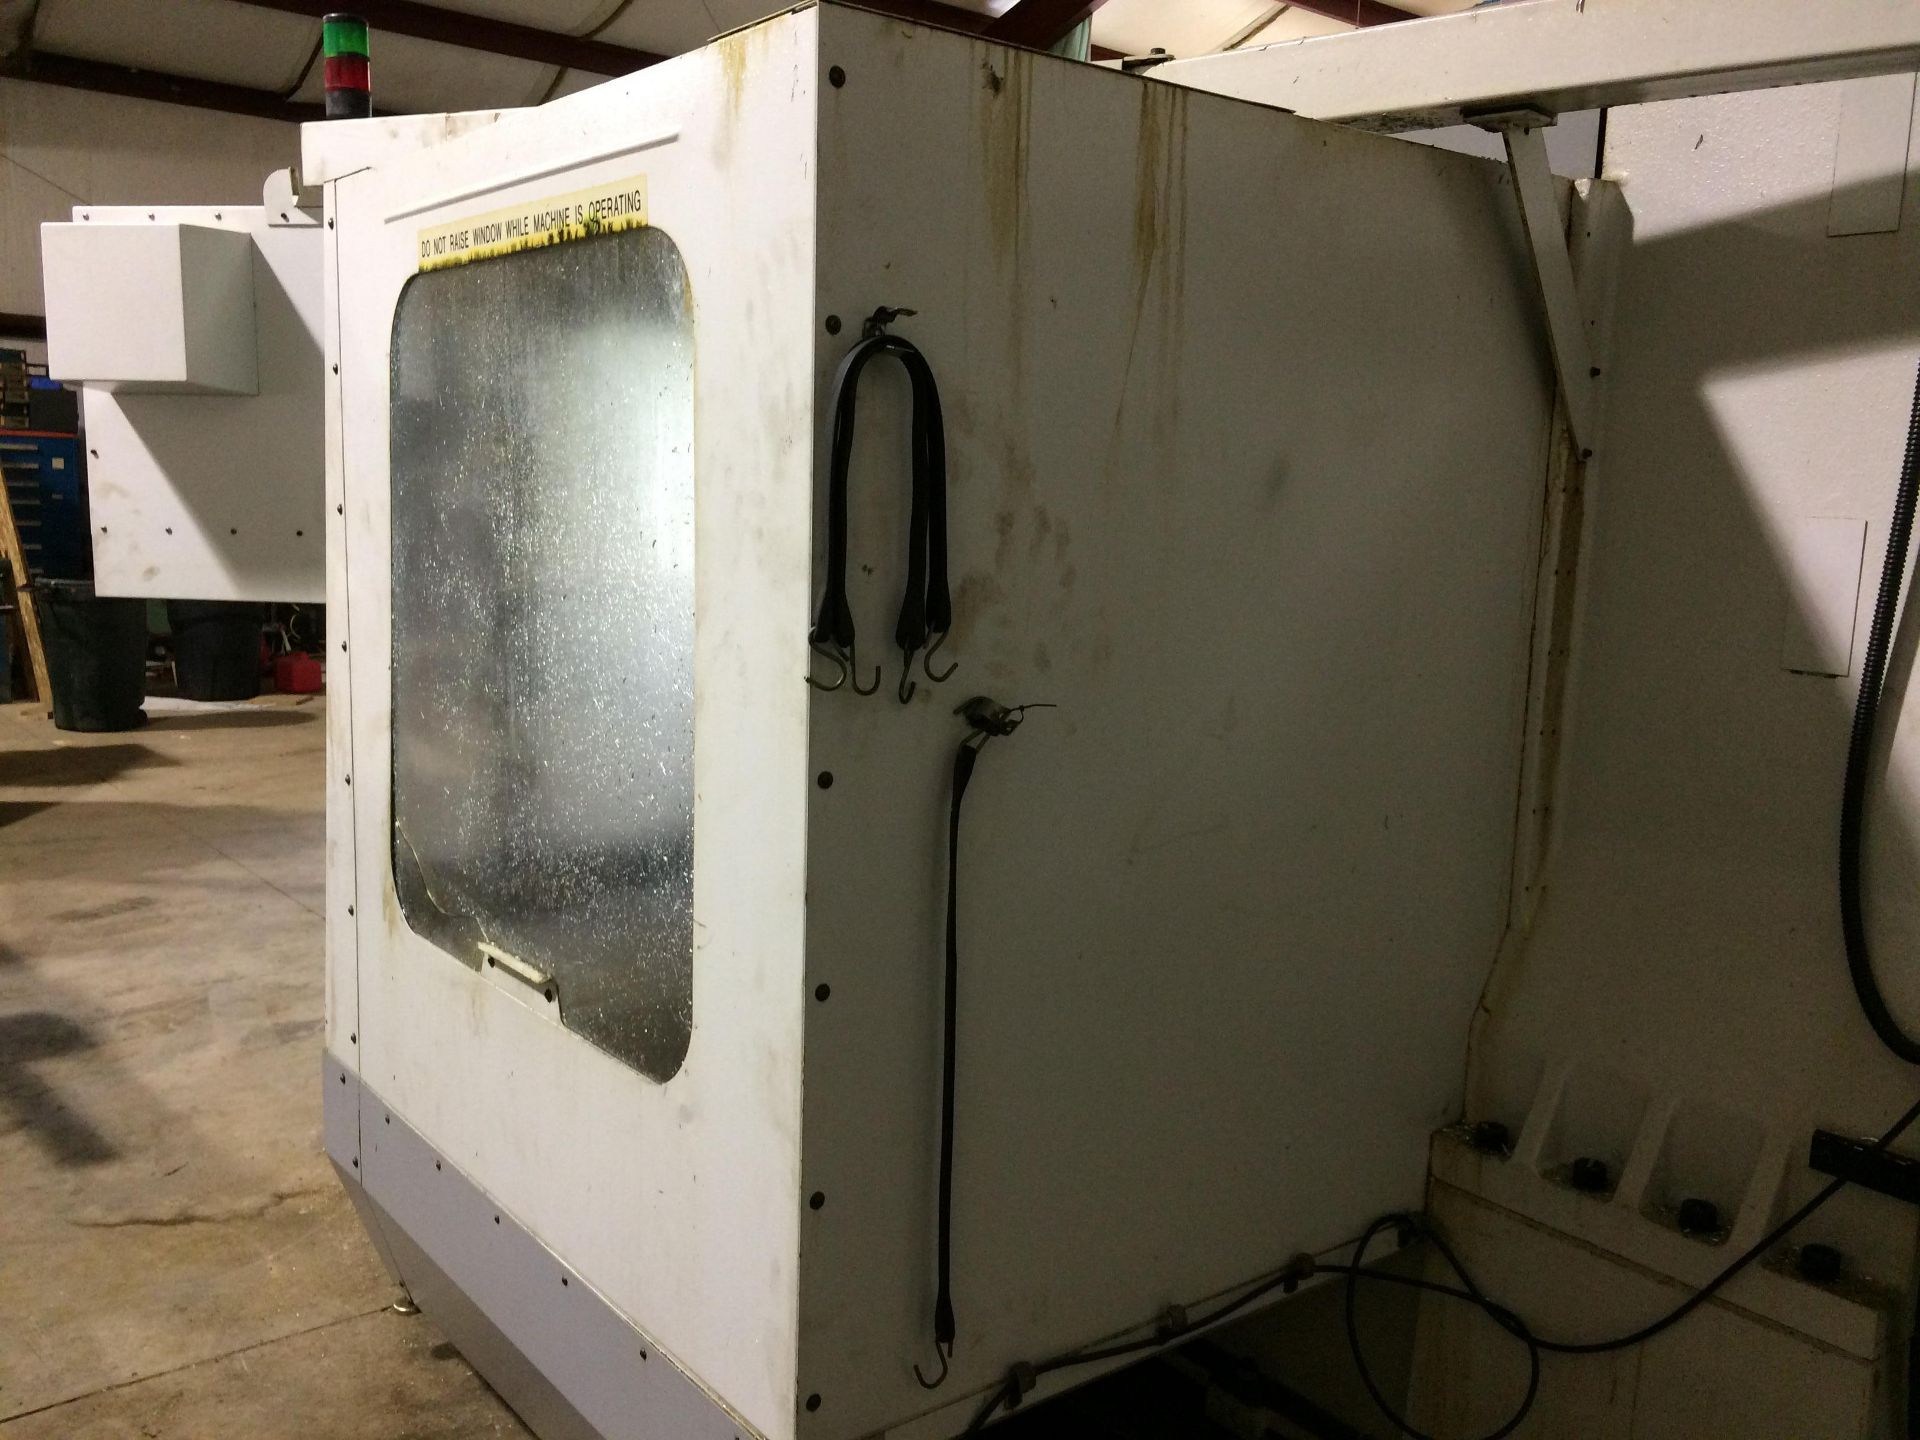 1995 Haas VF-3 Vertical Machining Center - Image 3 of 7